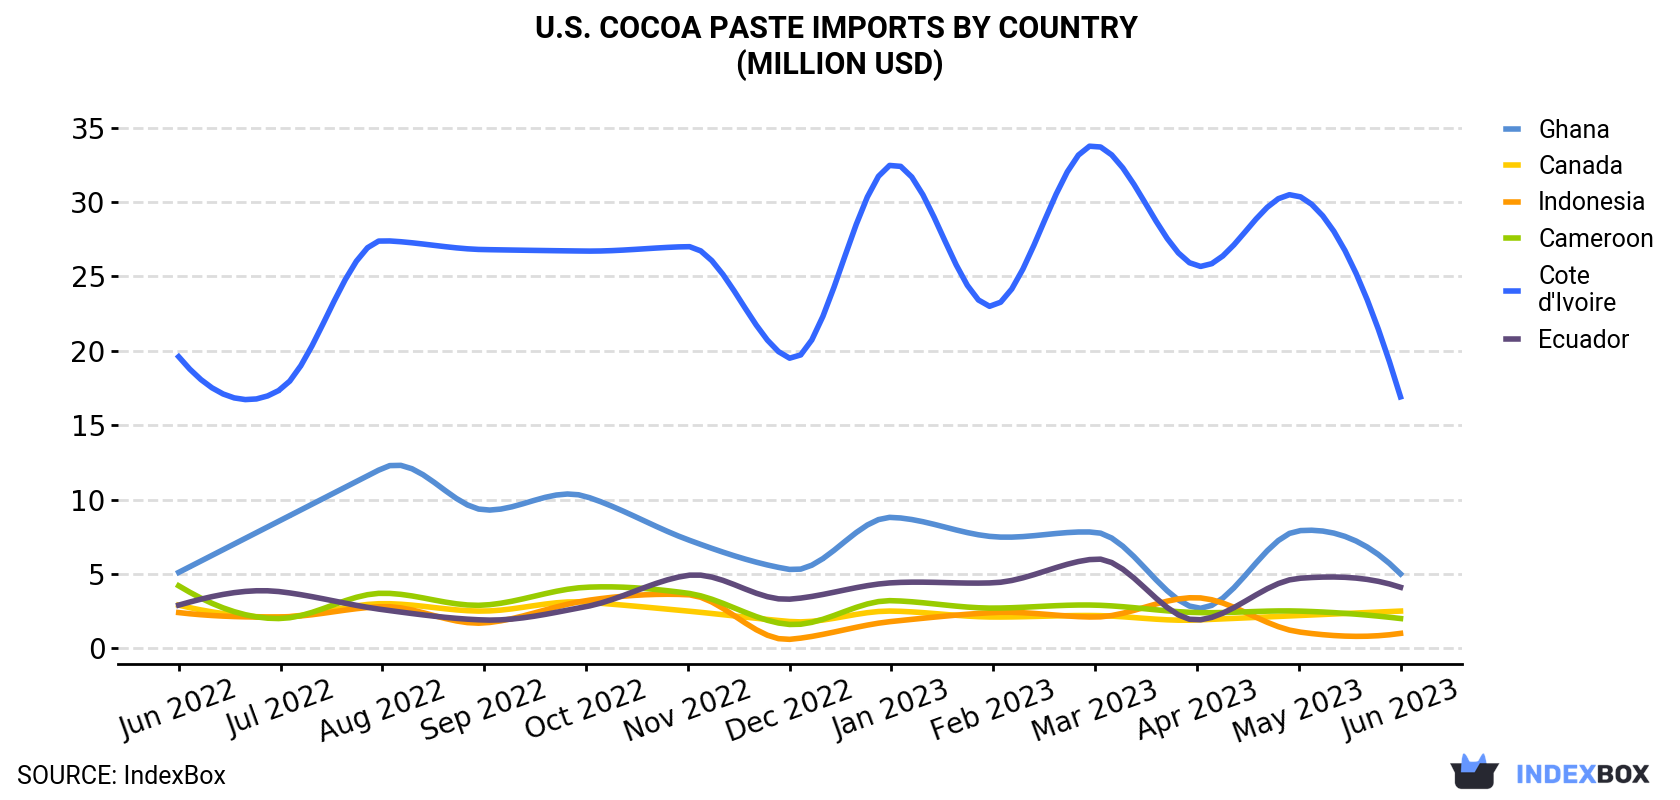 U.S. Cocoa Paste Imports By Country (Million USD)